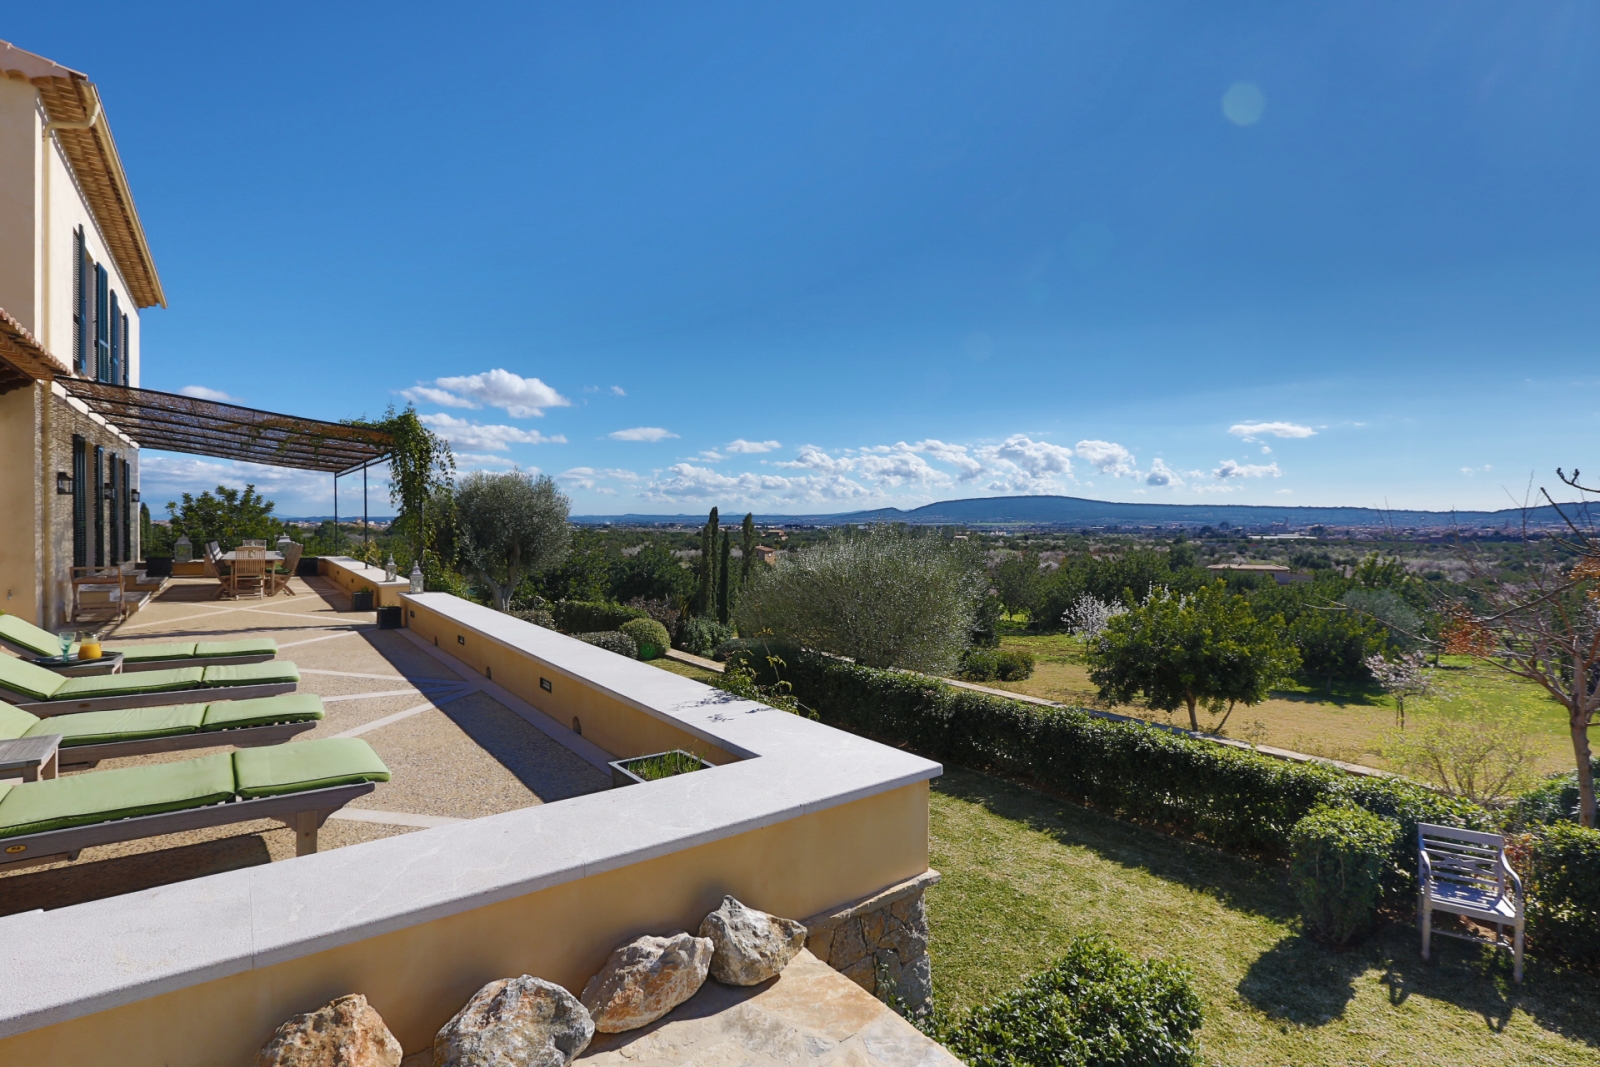 Terrace of luxury villa Casa Hermosa with loungers and shaded outdoor dining area and views over the Mallorcan countryside